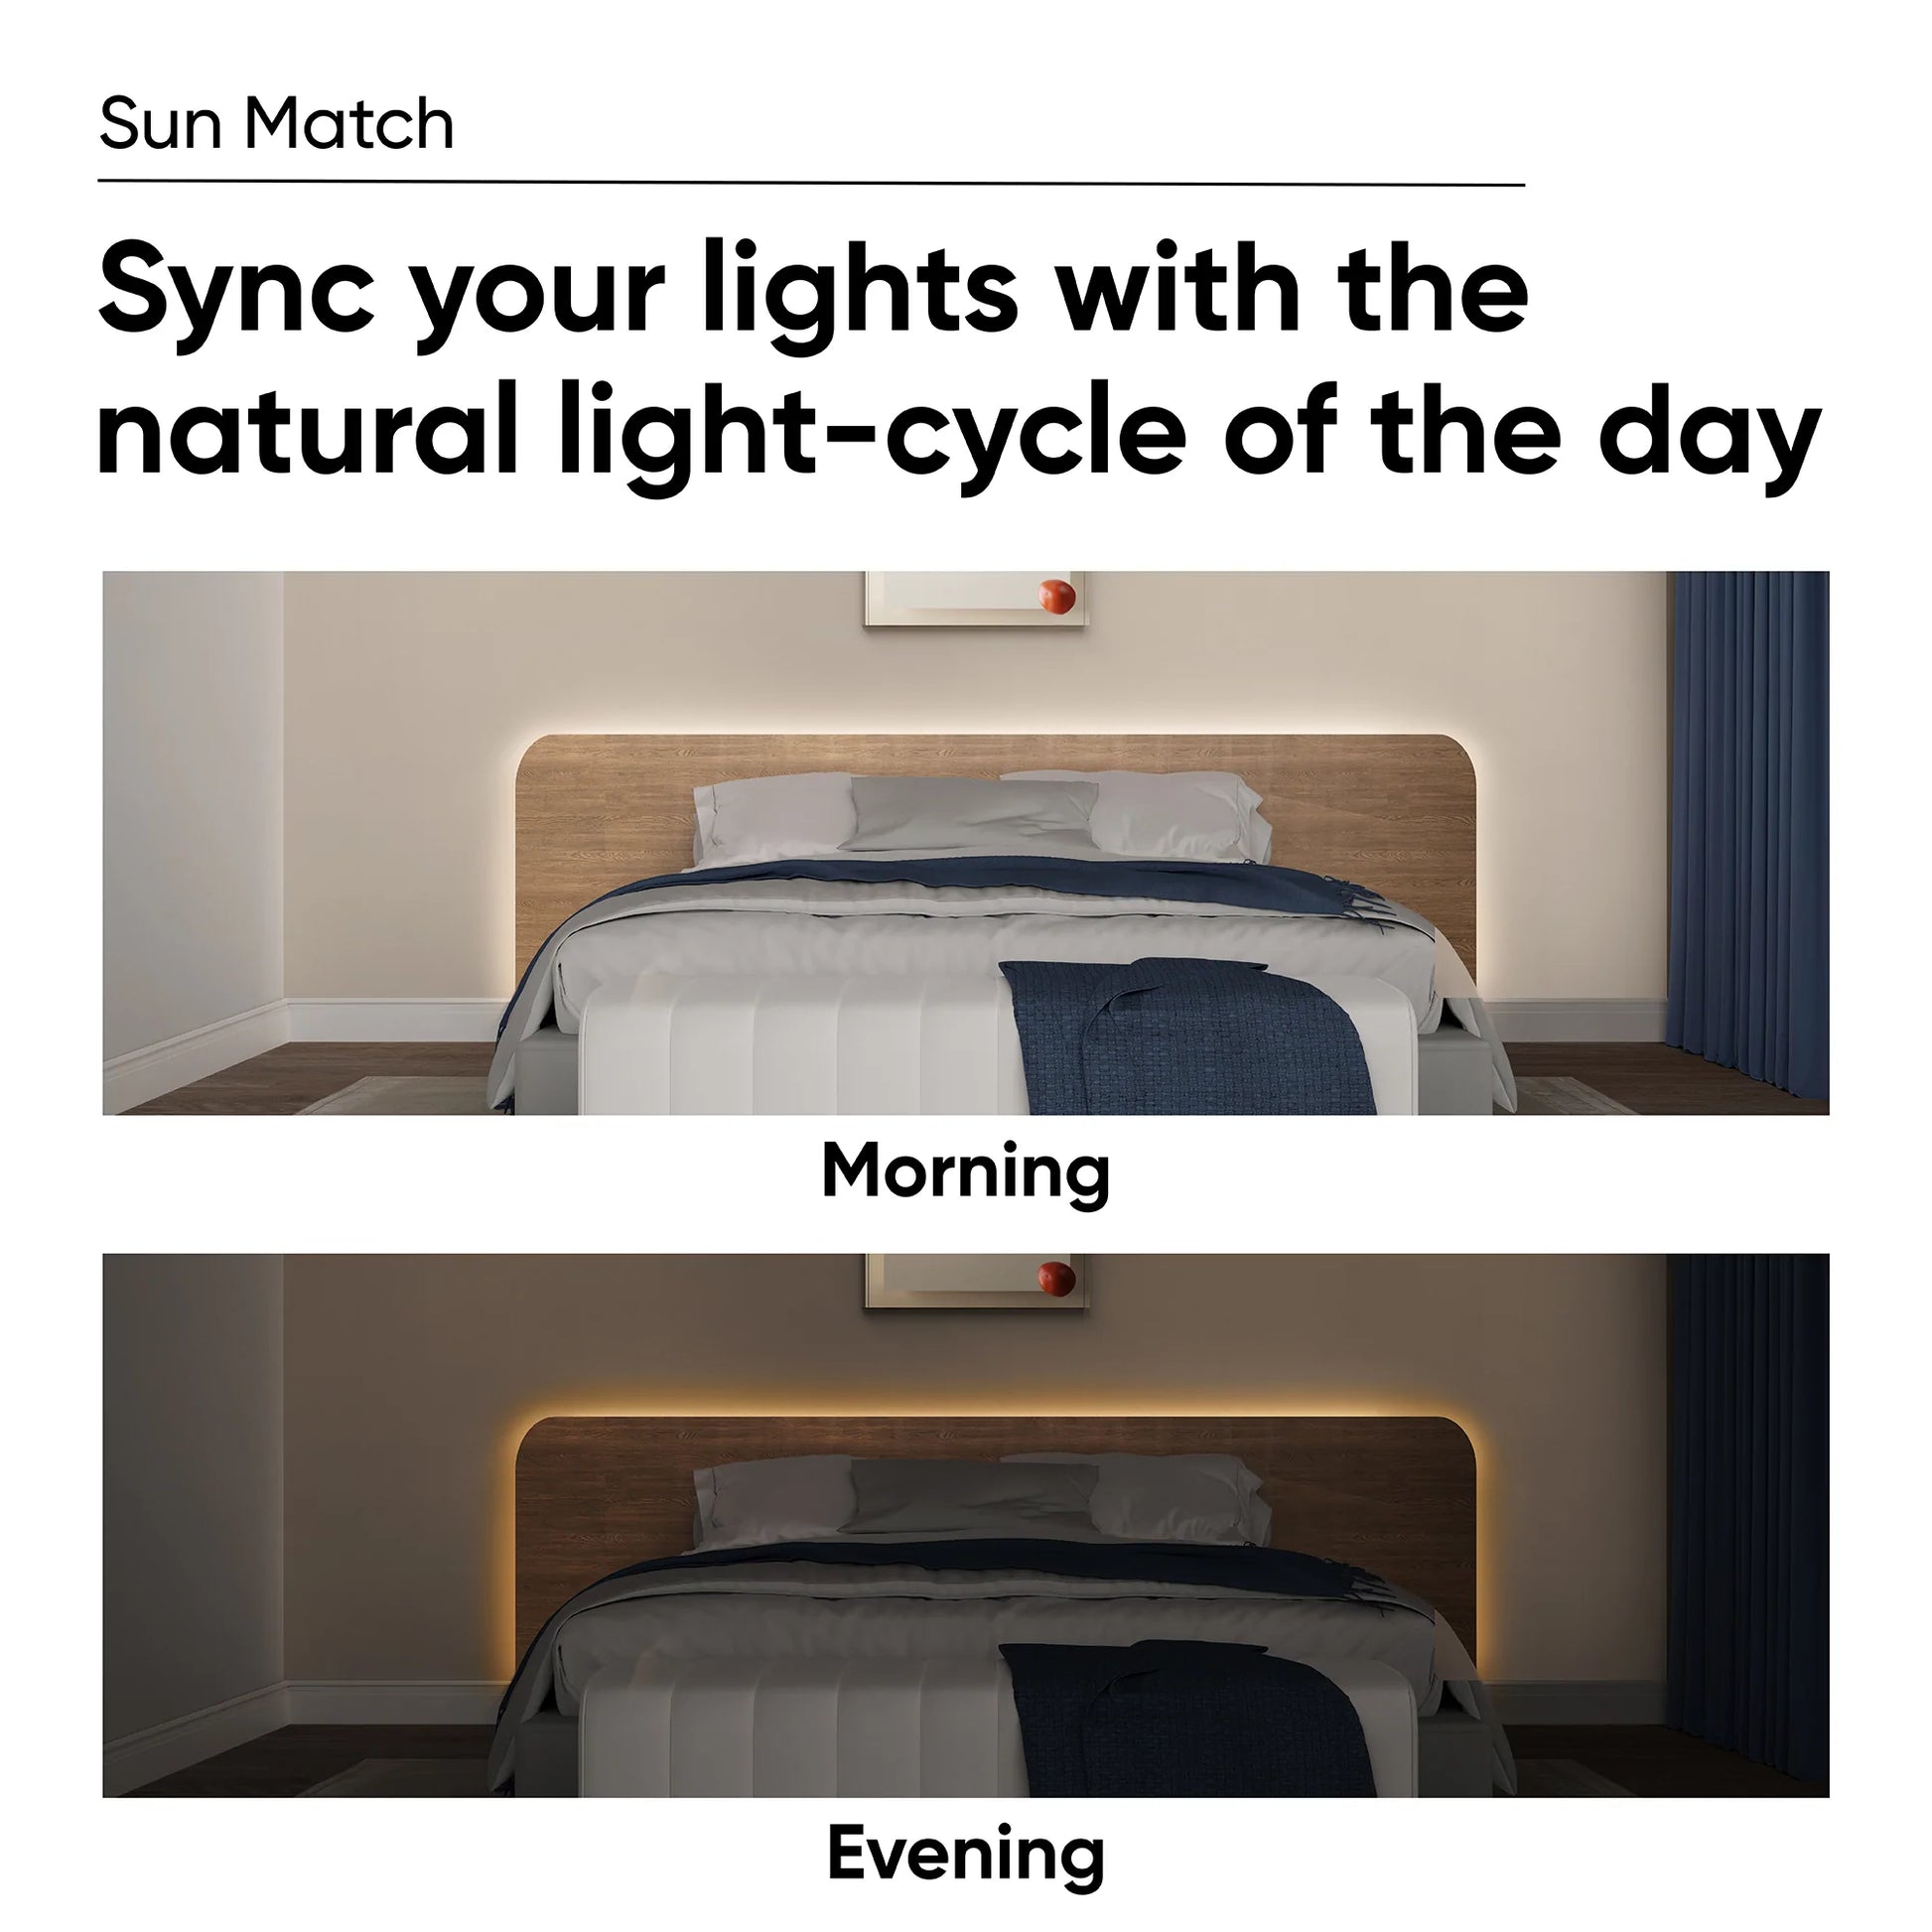 Side-by-side image comparison of the same room being lit at different times of the day. Text overlay that says "Sun Match."